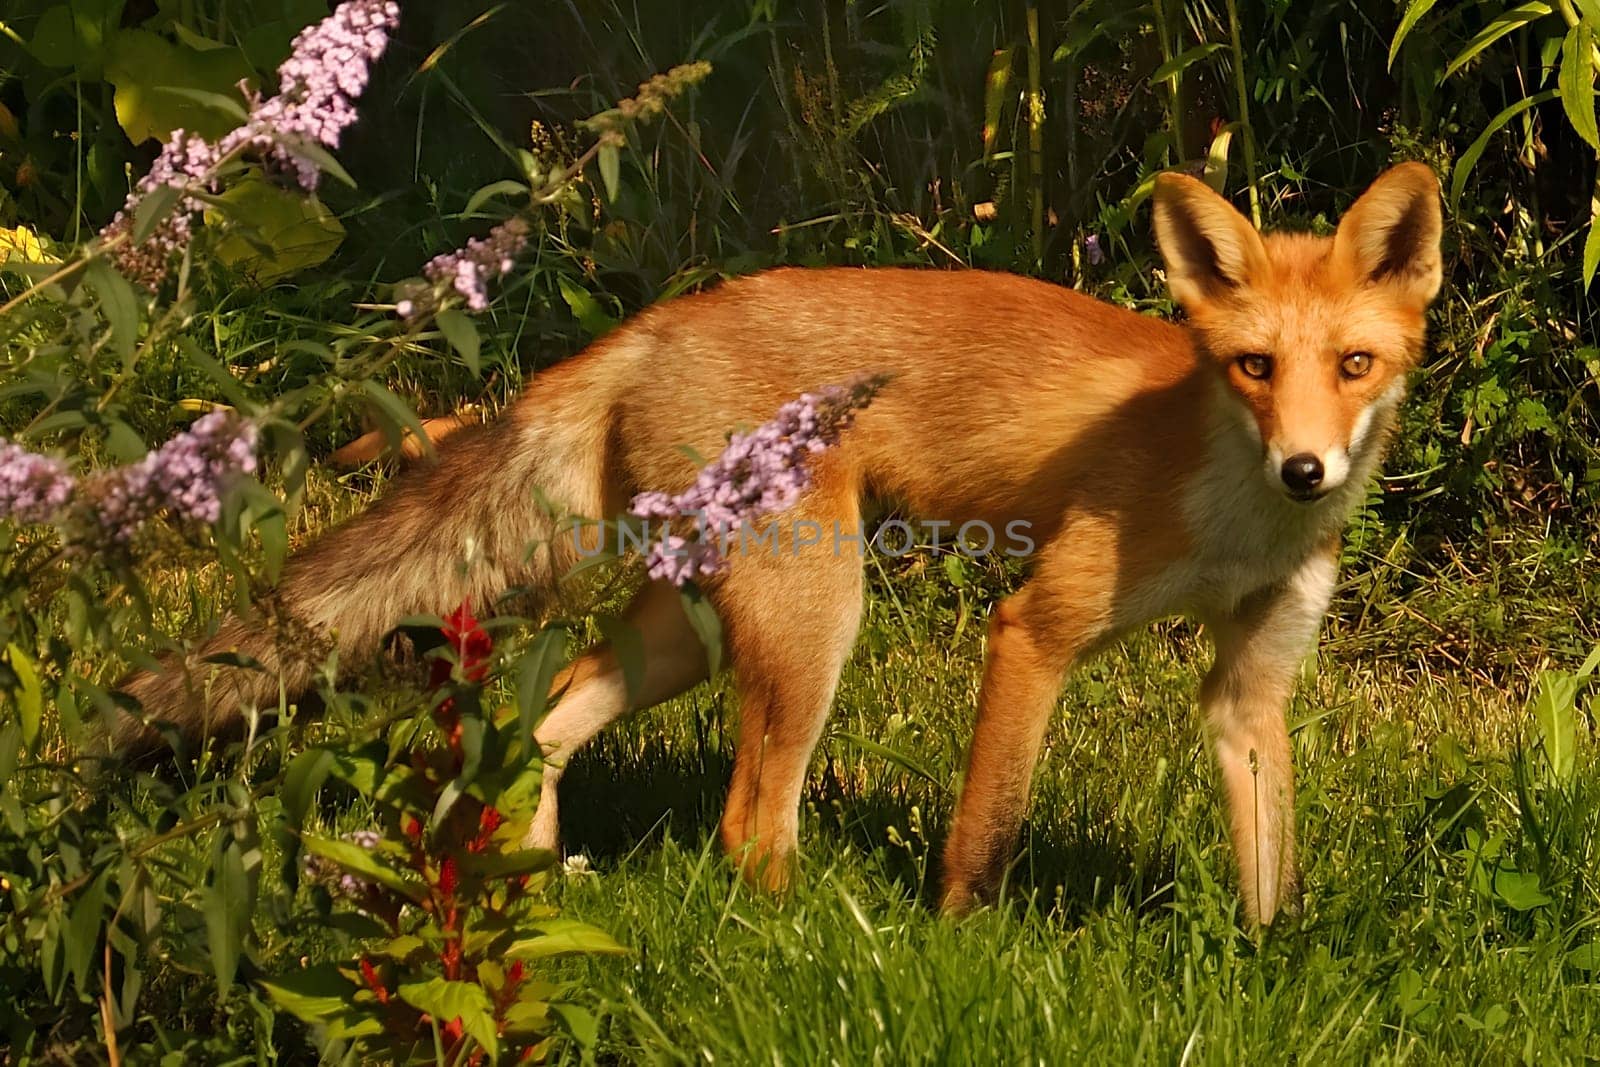 A red fox gracefully prowls through green grass, its fiery fur blending with the flora. Daylight illuminates its keen eyes, searching for food.